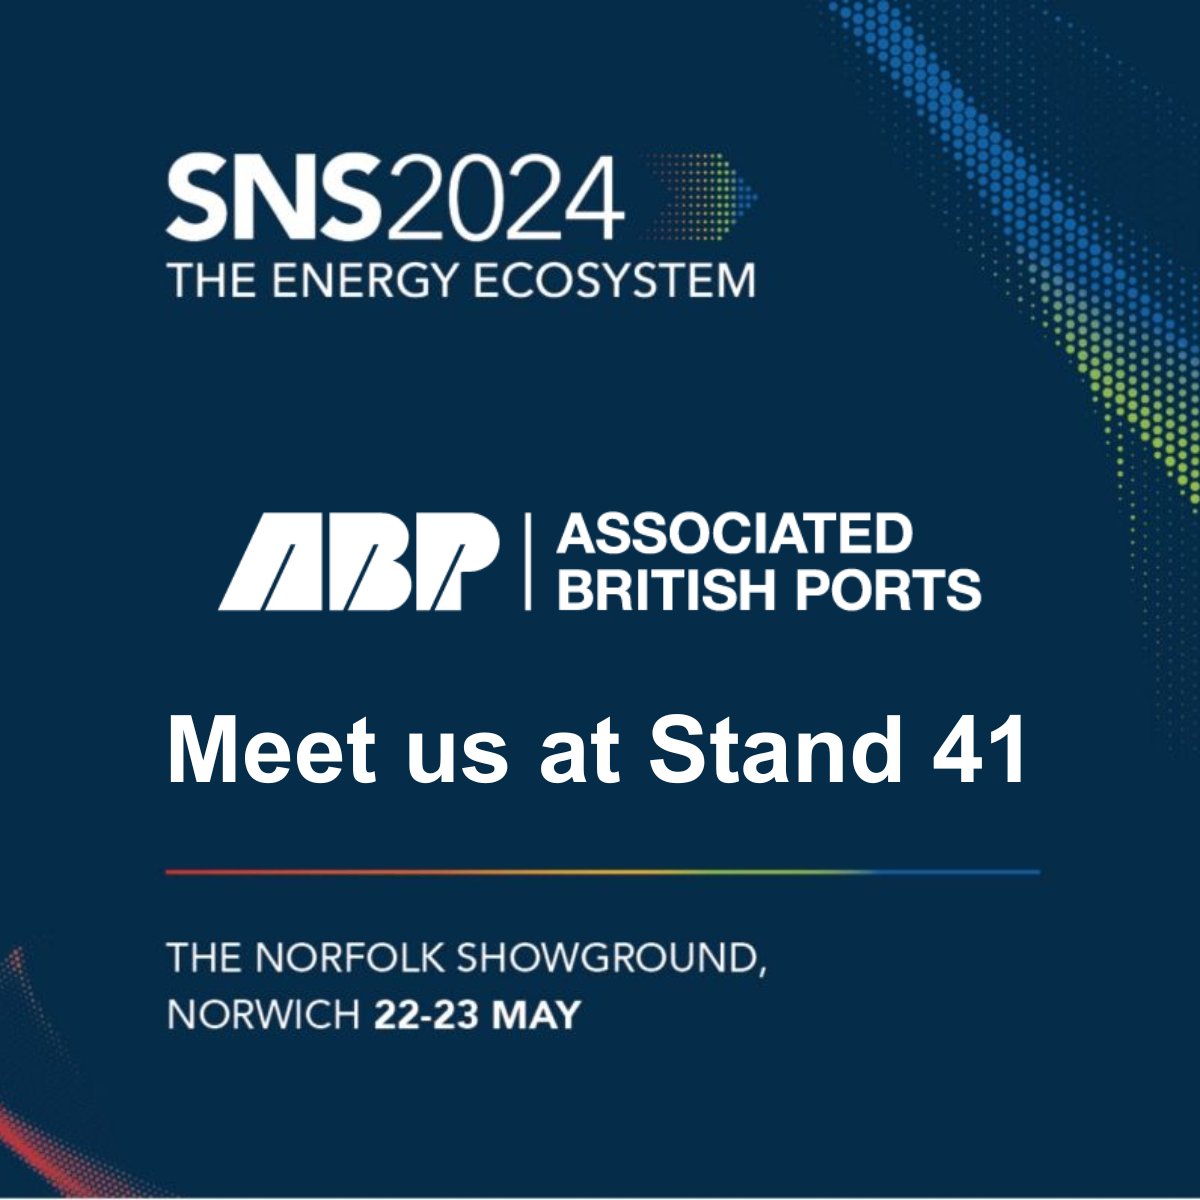 1️⃣ day to go until @EEEGR's SNS 2024 Conference. ABP will be showcasing progress on the construction of the Lowestoft Eastern Energy Facility, which is now well underway with works due to complete on site by September 2024. Come and say hello to our team at stand 41!